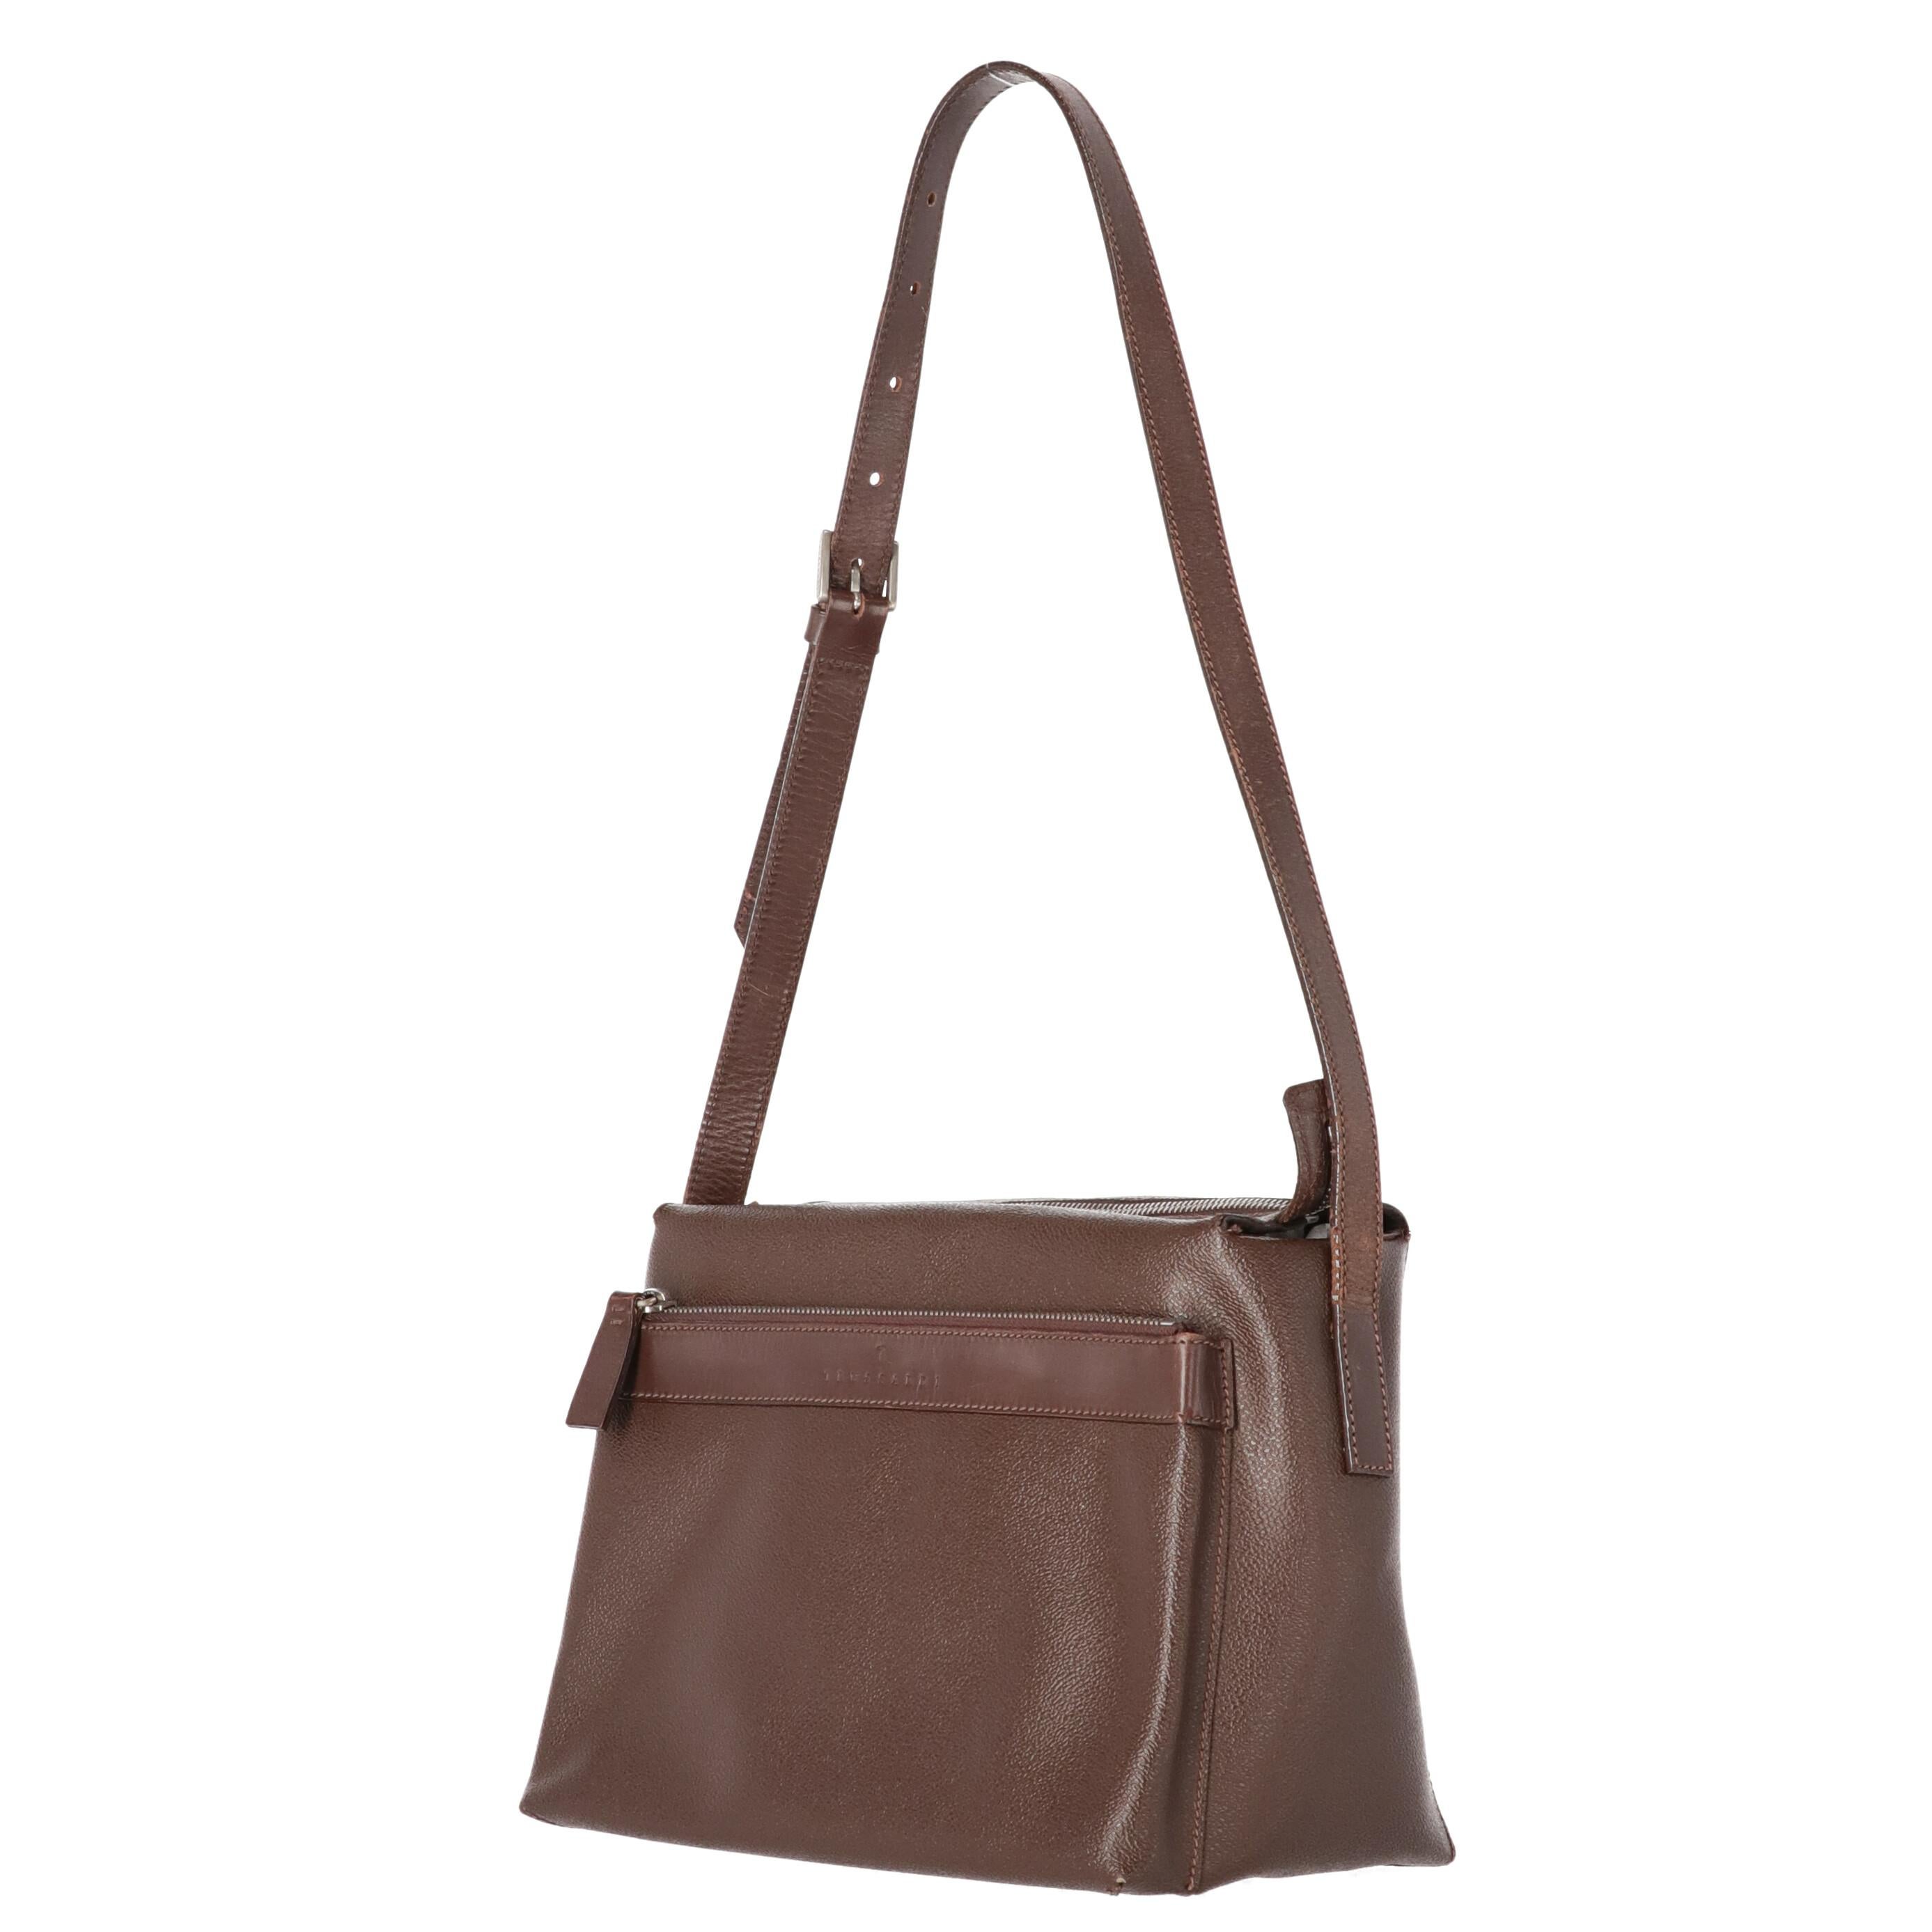 Crespo Collection Trussardi brown textured genuine leather shoulder bag, trapeze design and zip closure. Tone-on-tone smooth leather adjustable shoulder strap with logoed metal buckle. It features a wide front pocket with smooth leather insert,